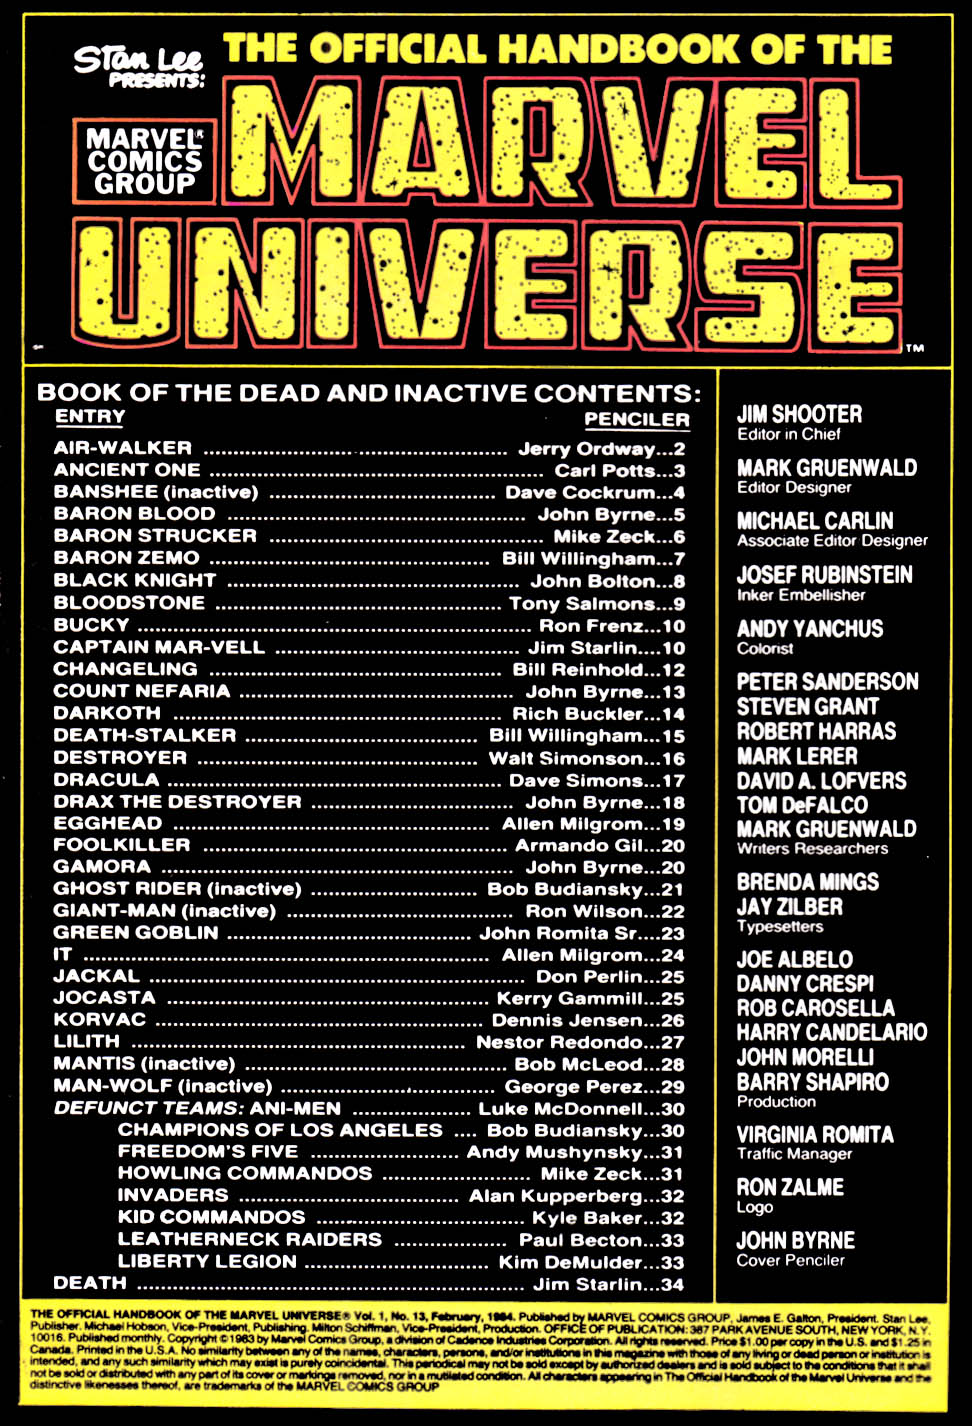 Read online The Official Handbook of the Marvel Universe comic -  Issue #13 - 2